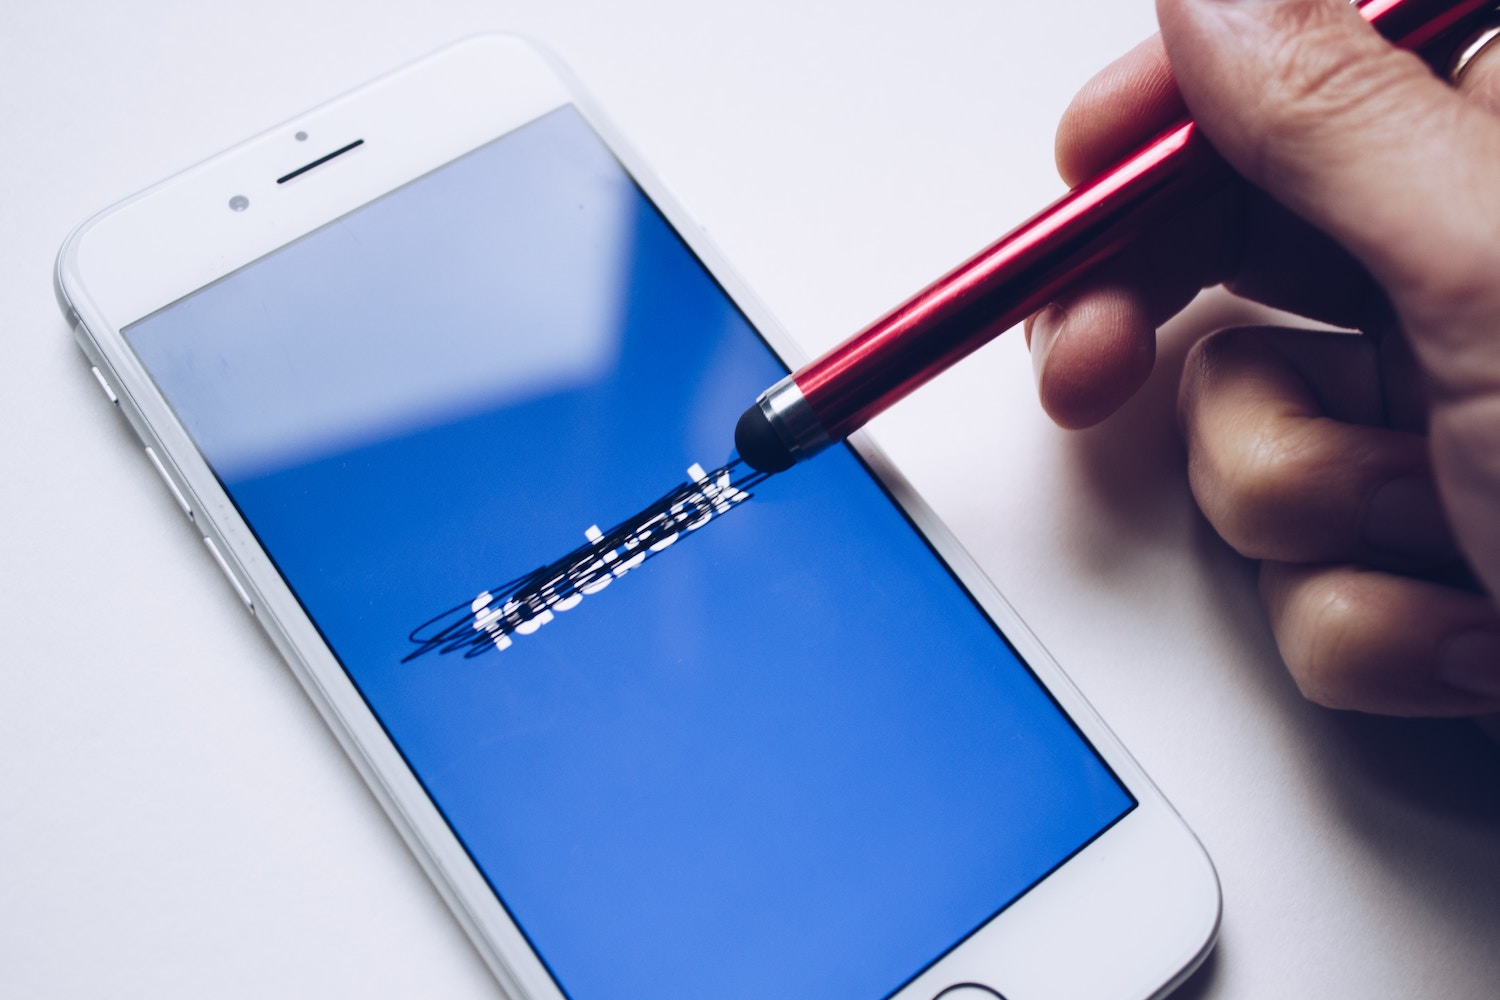 A mobile phone showing a Facebook logo, struck through several times, on blue background. To the right of it a hand holding a pen, which seems to have been used for striking the logo. Photo by Thought Catalog via Unsplash, https://unsplash.com/photos/tRL_Rkh6D8o